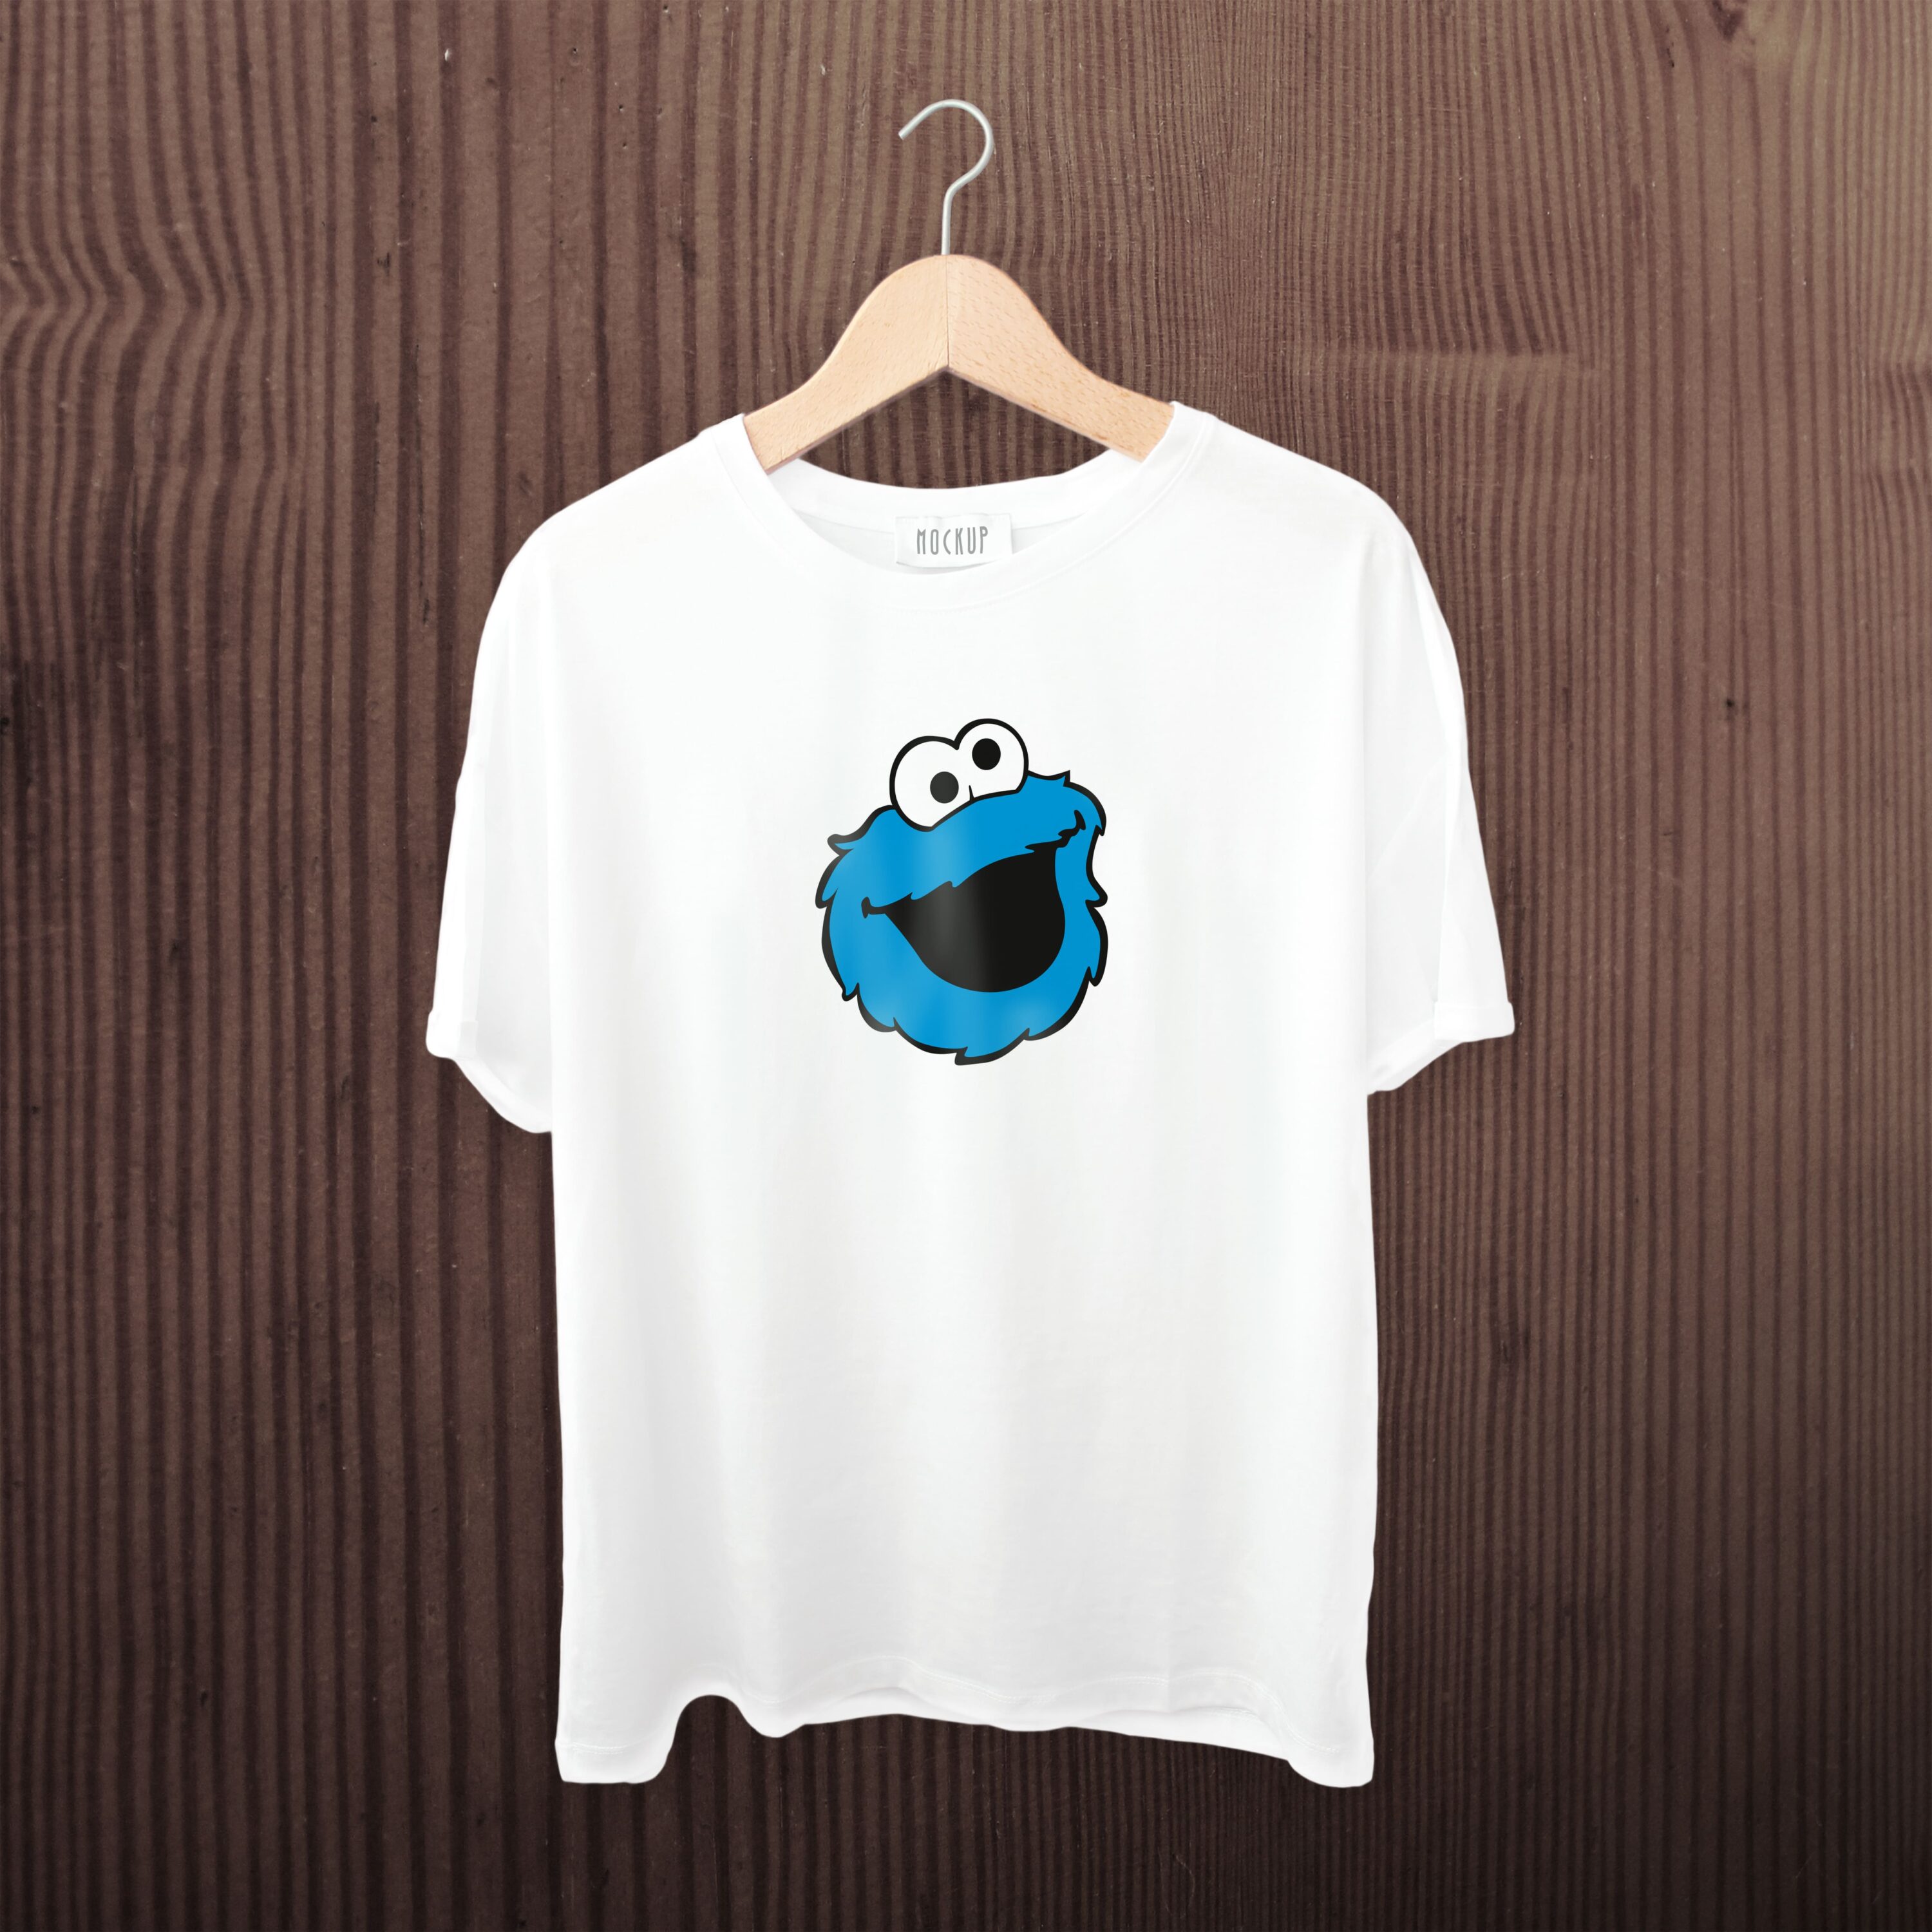 A white t-shirt with a smiling cookie monster face.